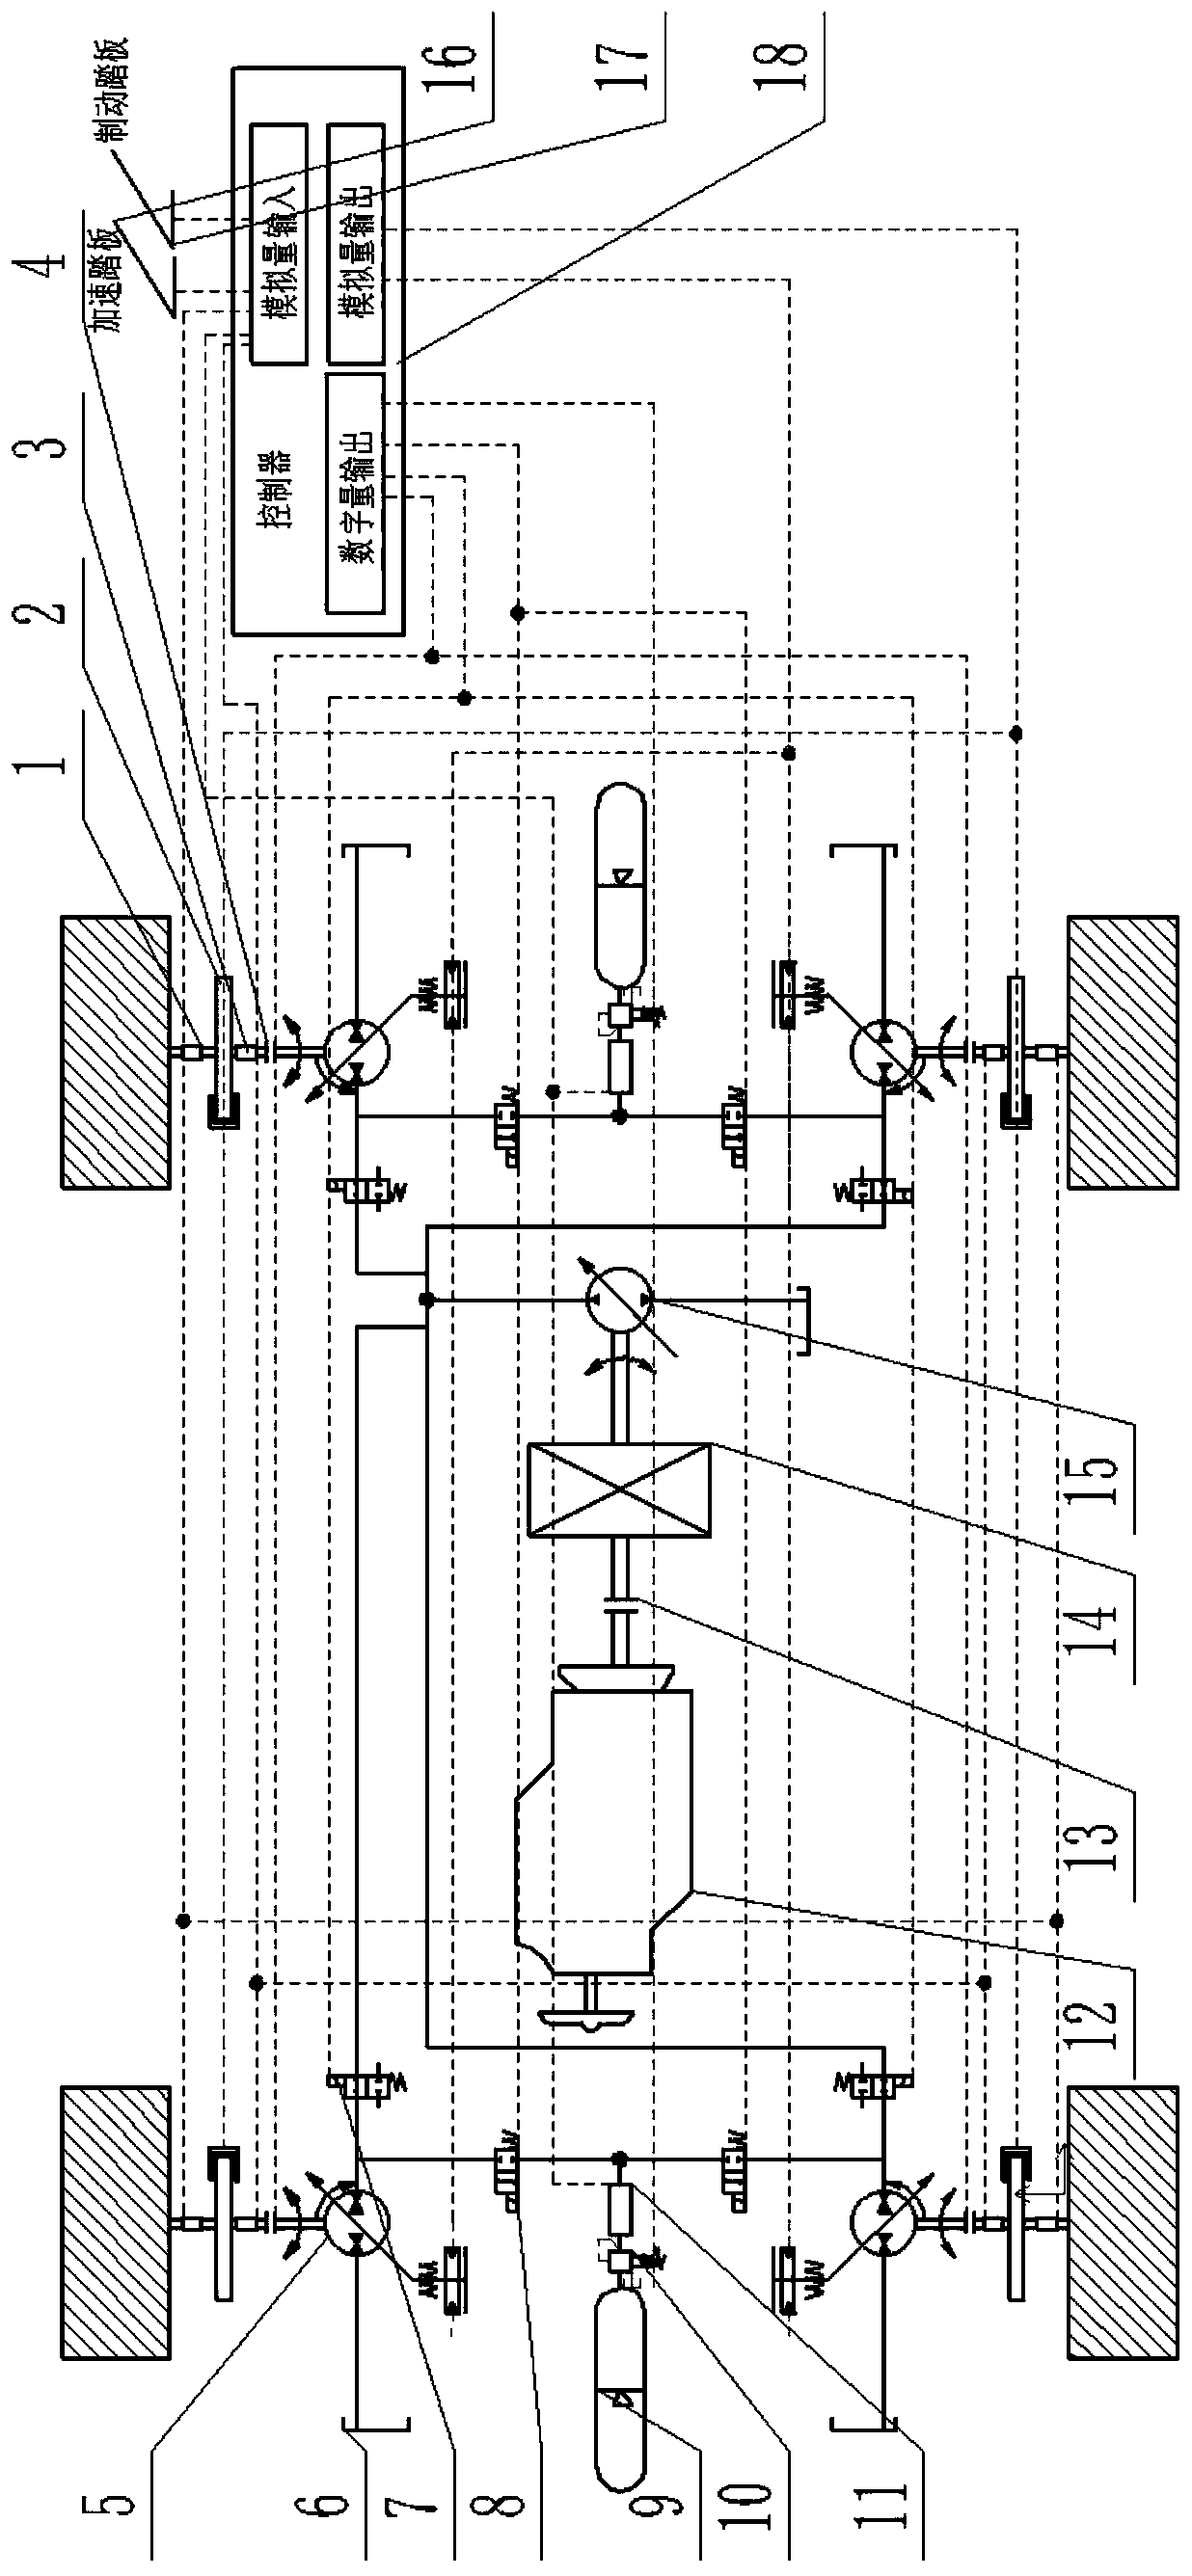 Regenerative braking energy recovery system of hydraulically-driven automobile